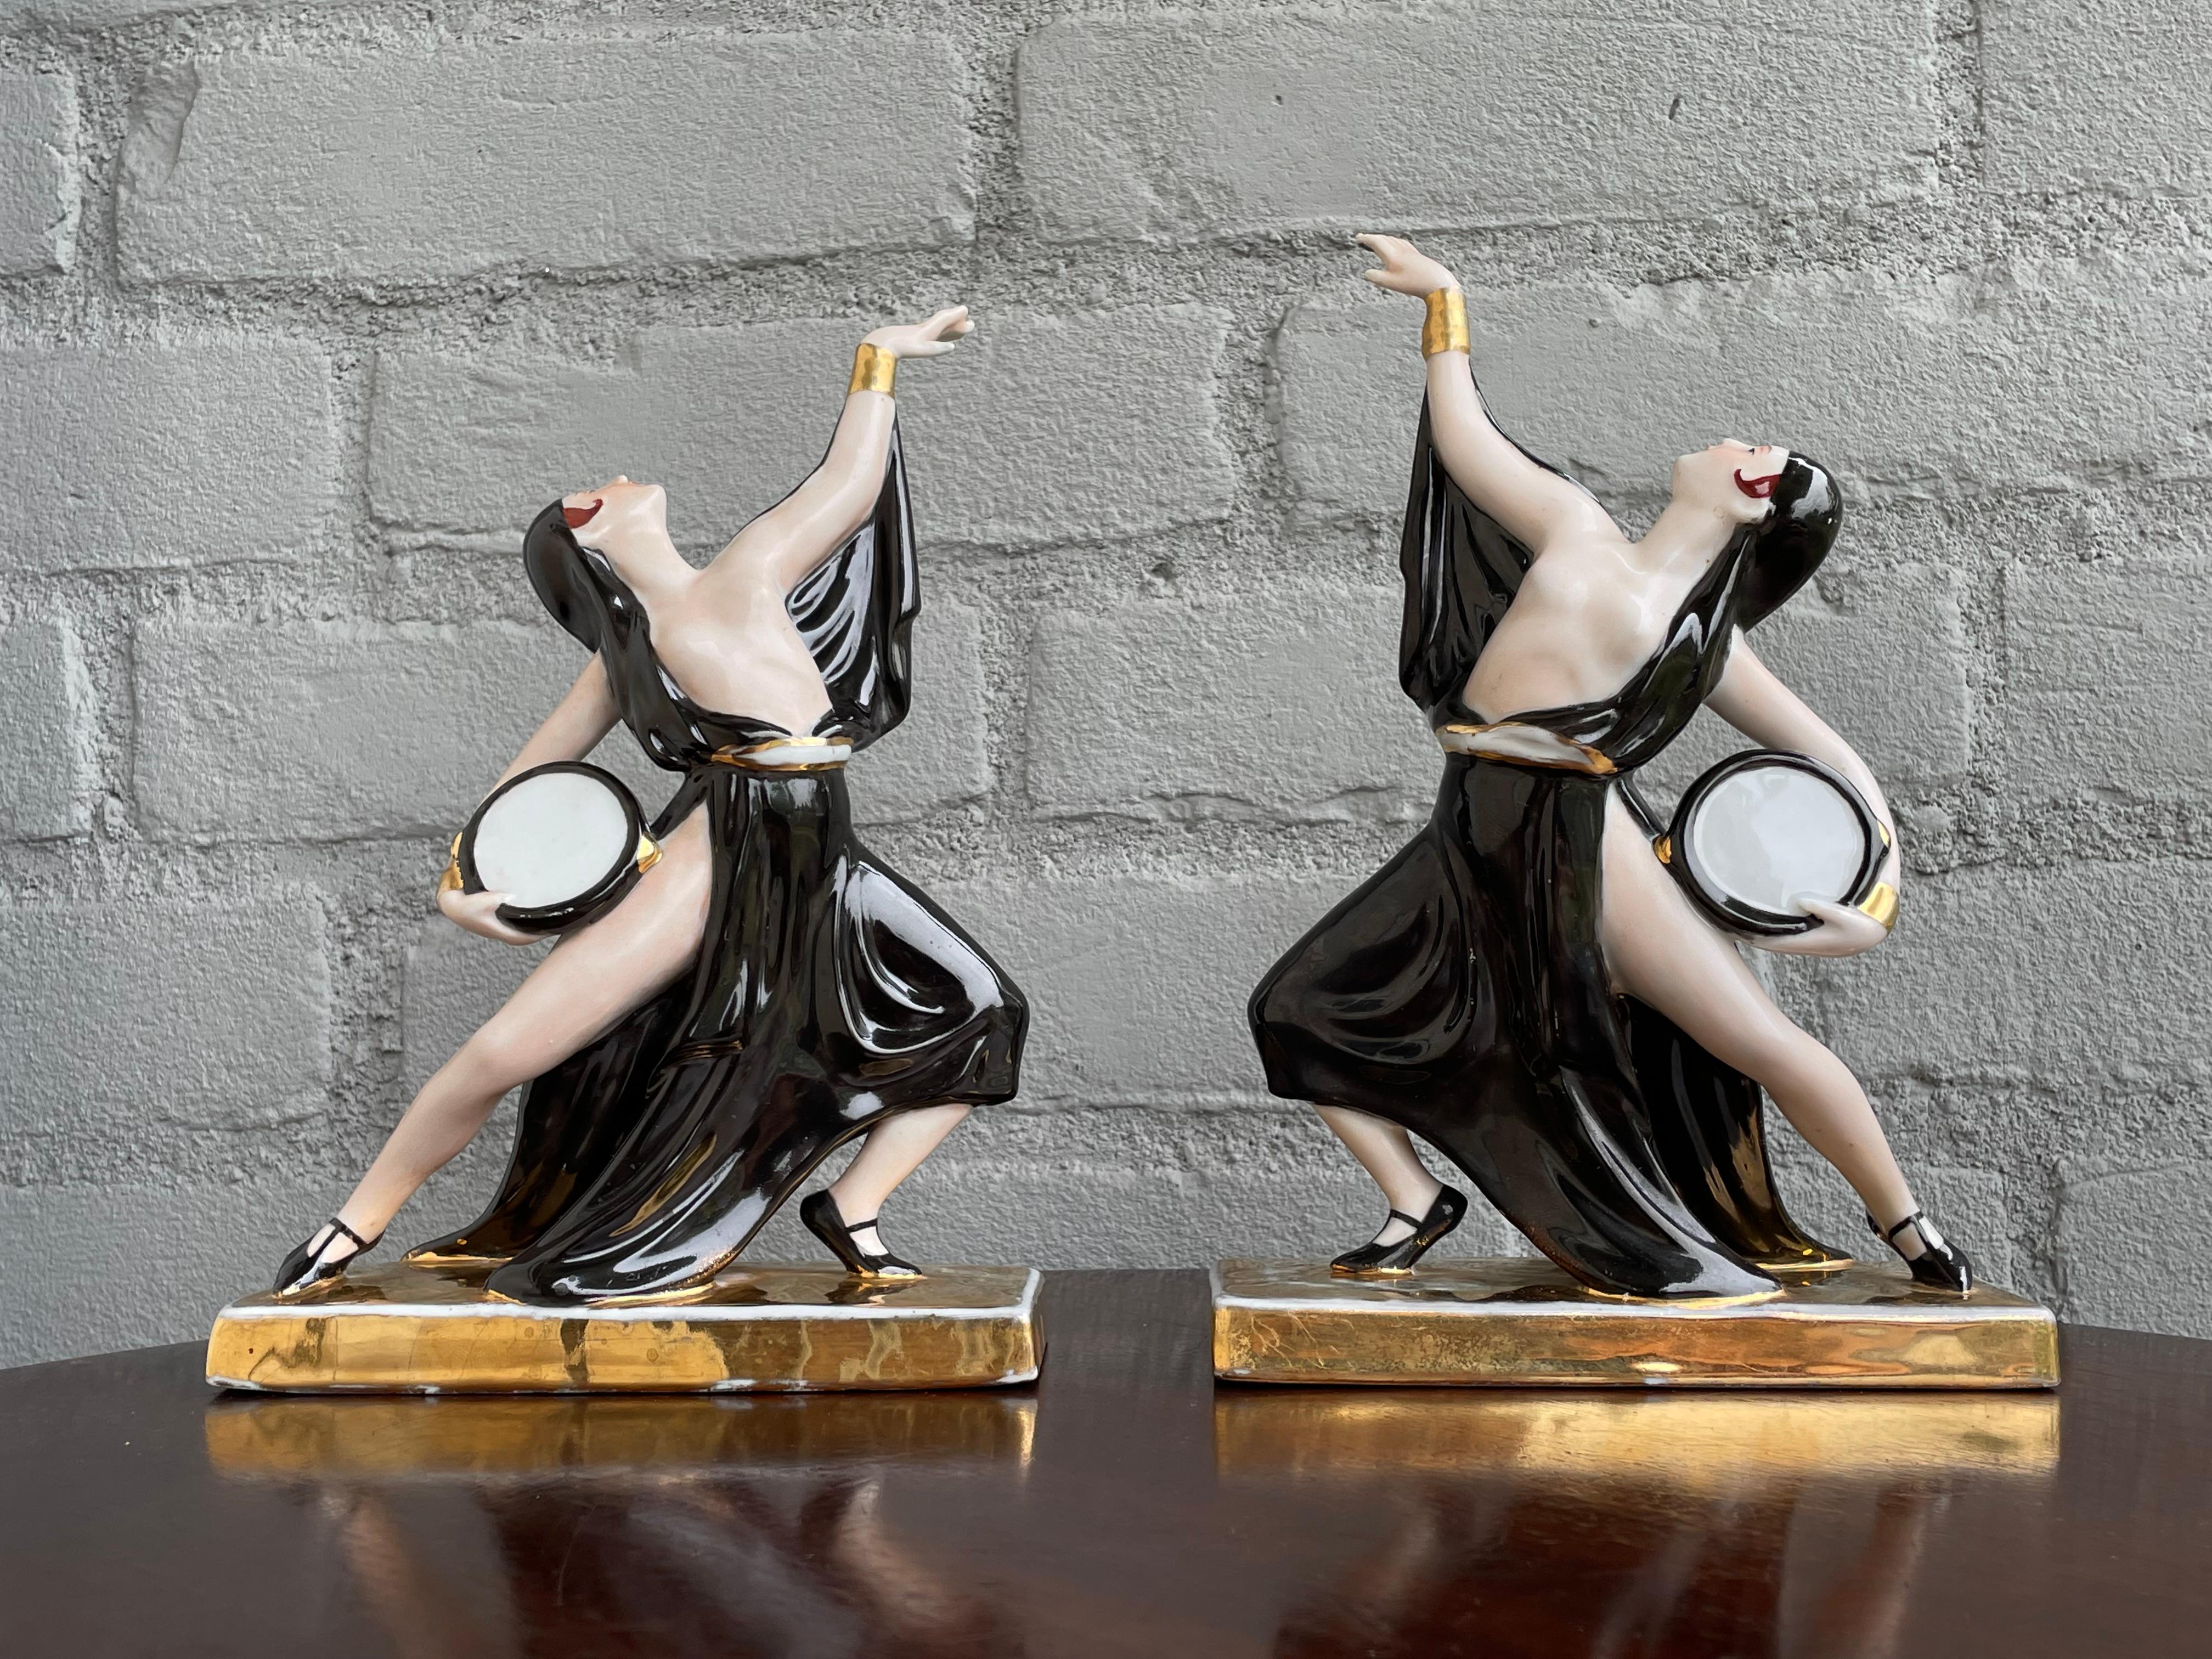 Rare & Stylish Pair of 1920s Porcelain French Art Deco Risque Dancer Bookends For Sale 2